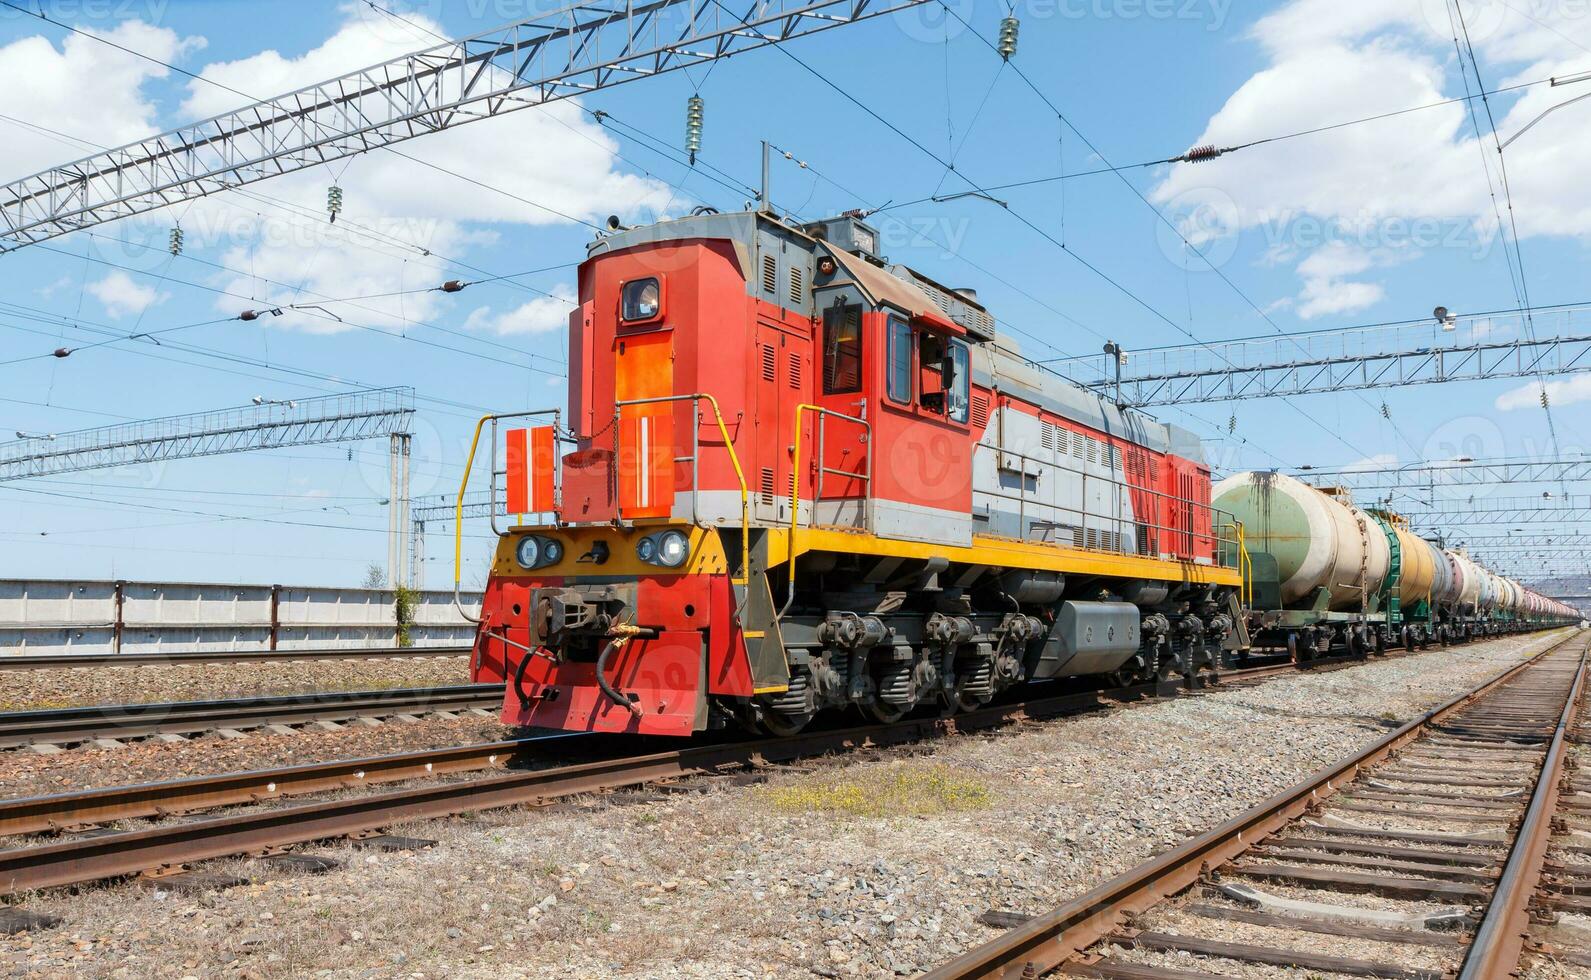 Freight locomotive pulls train with fuel tanks against blue sky. photo